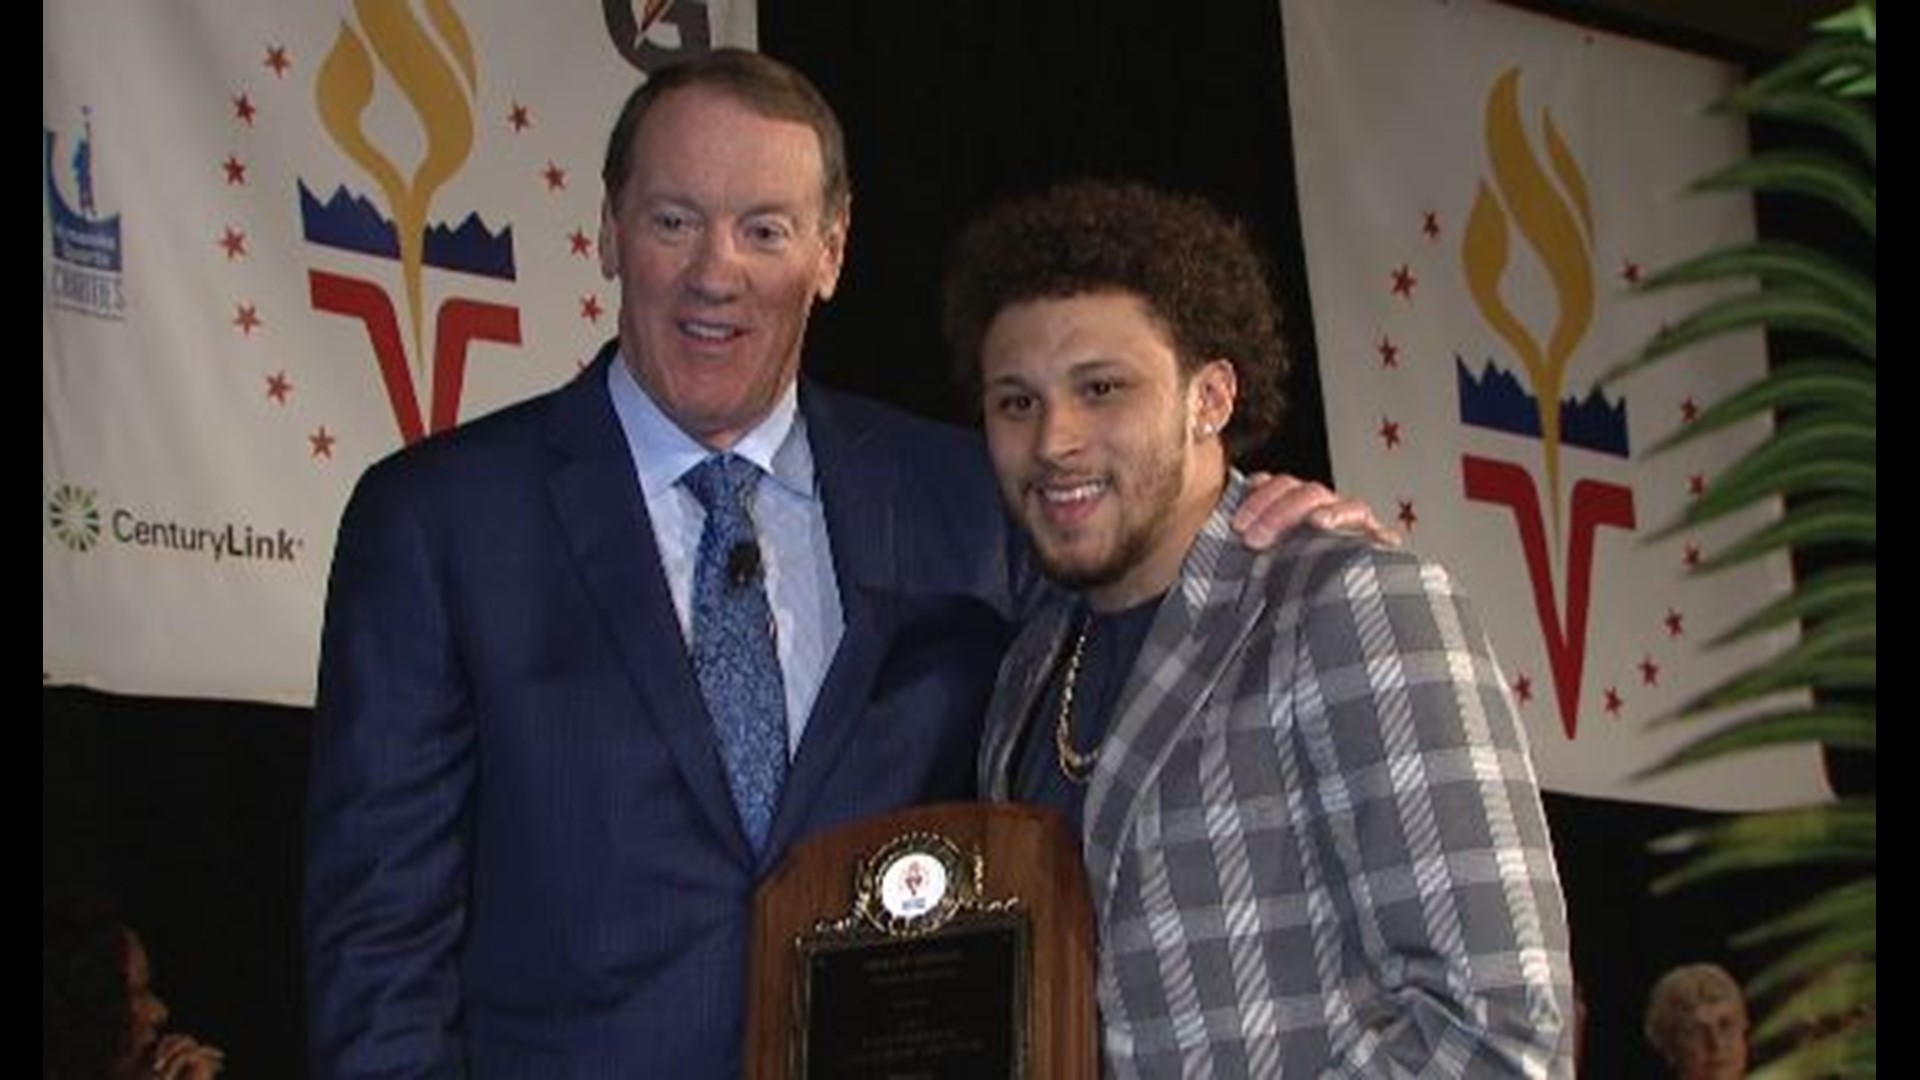 Phillip Lindsay describes what it means to be the recipient of the Colorado Sports Hall of Fame Professional Athlete of the Year during his acceptance speech Wednesday night.